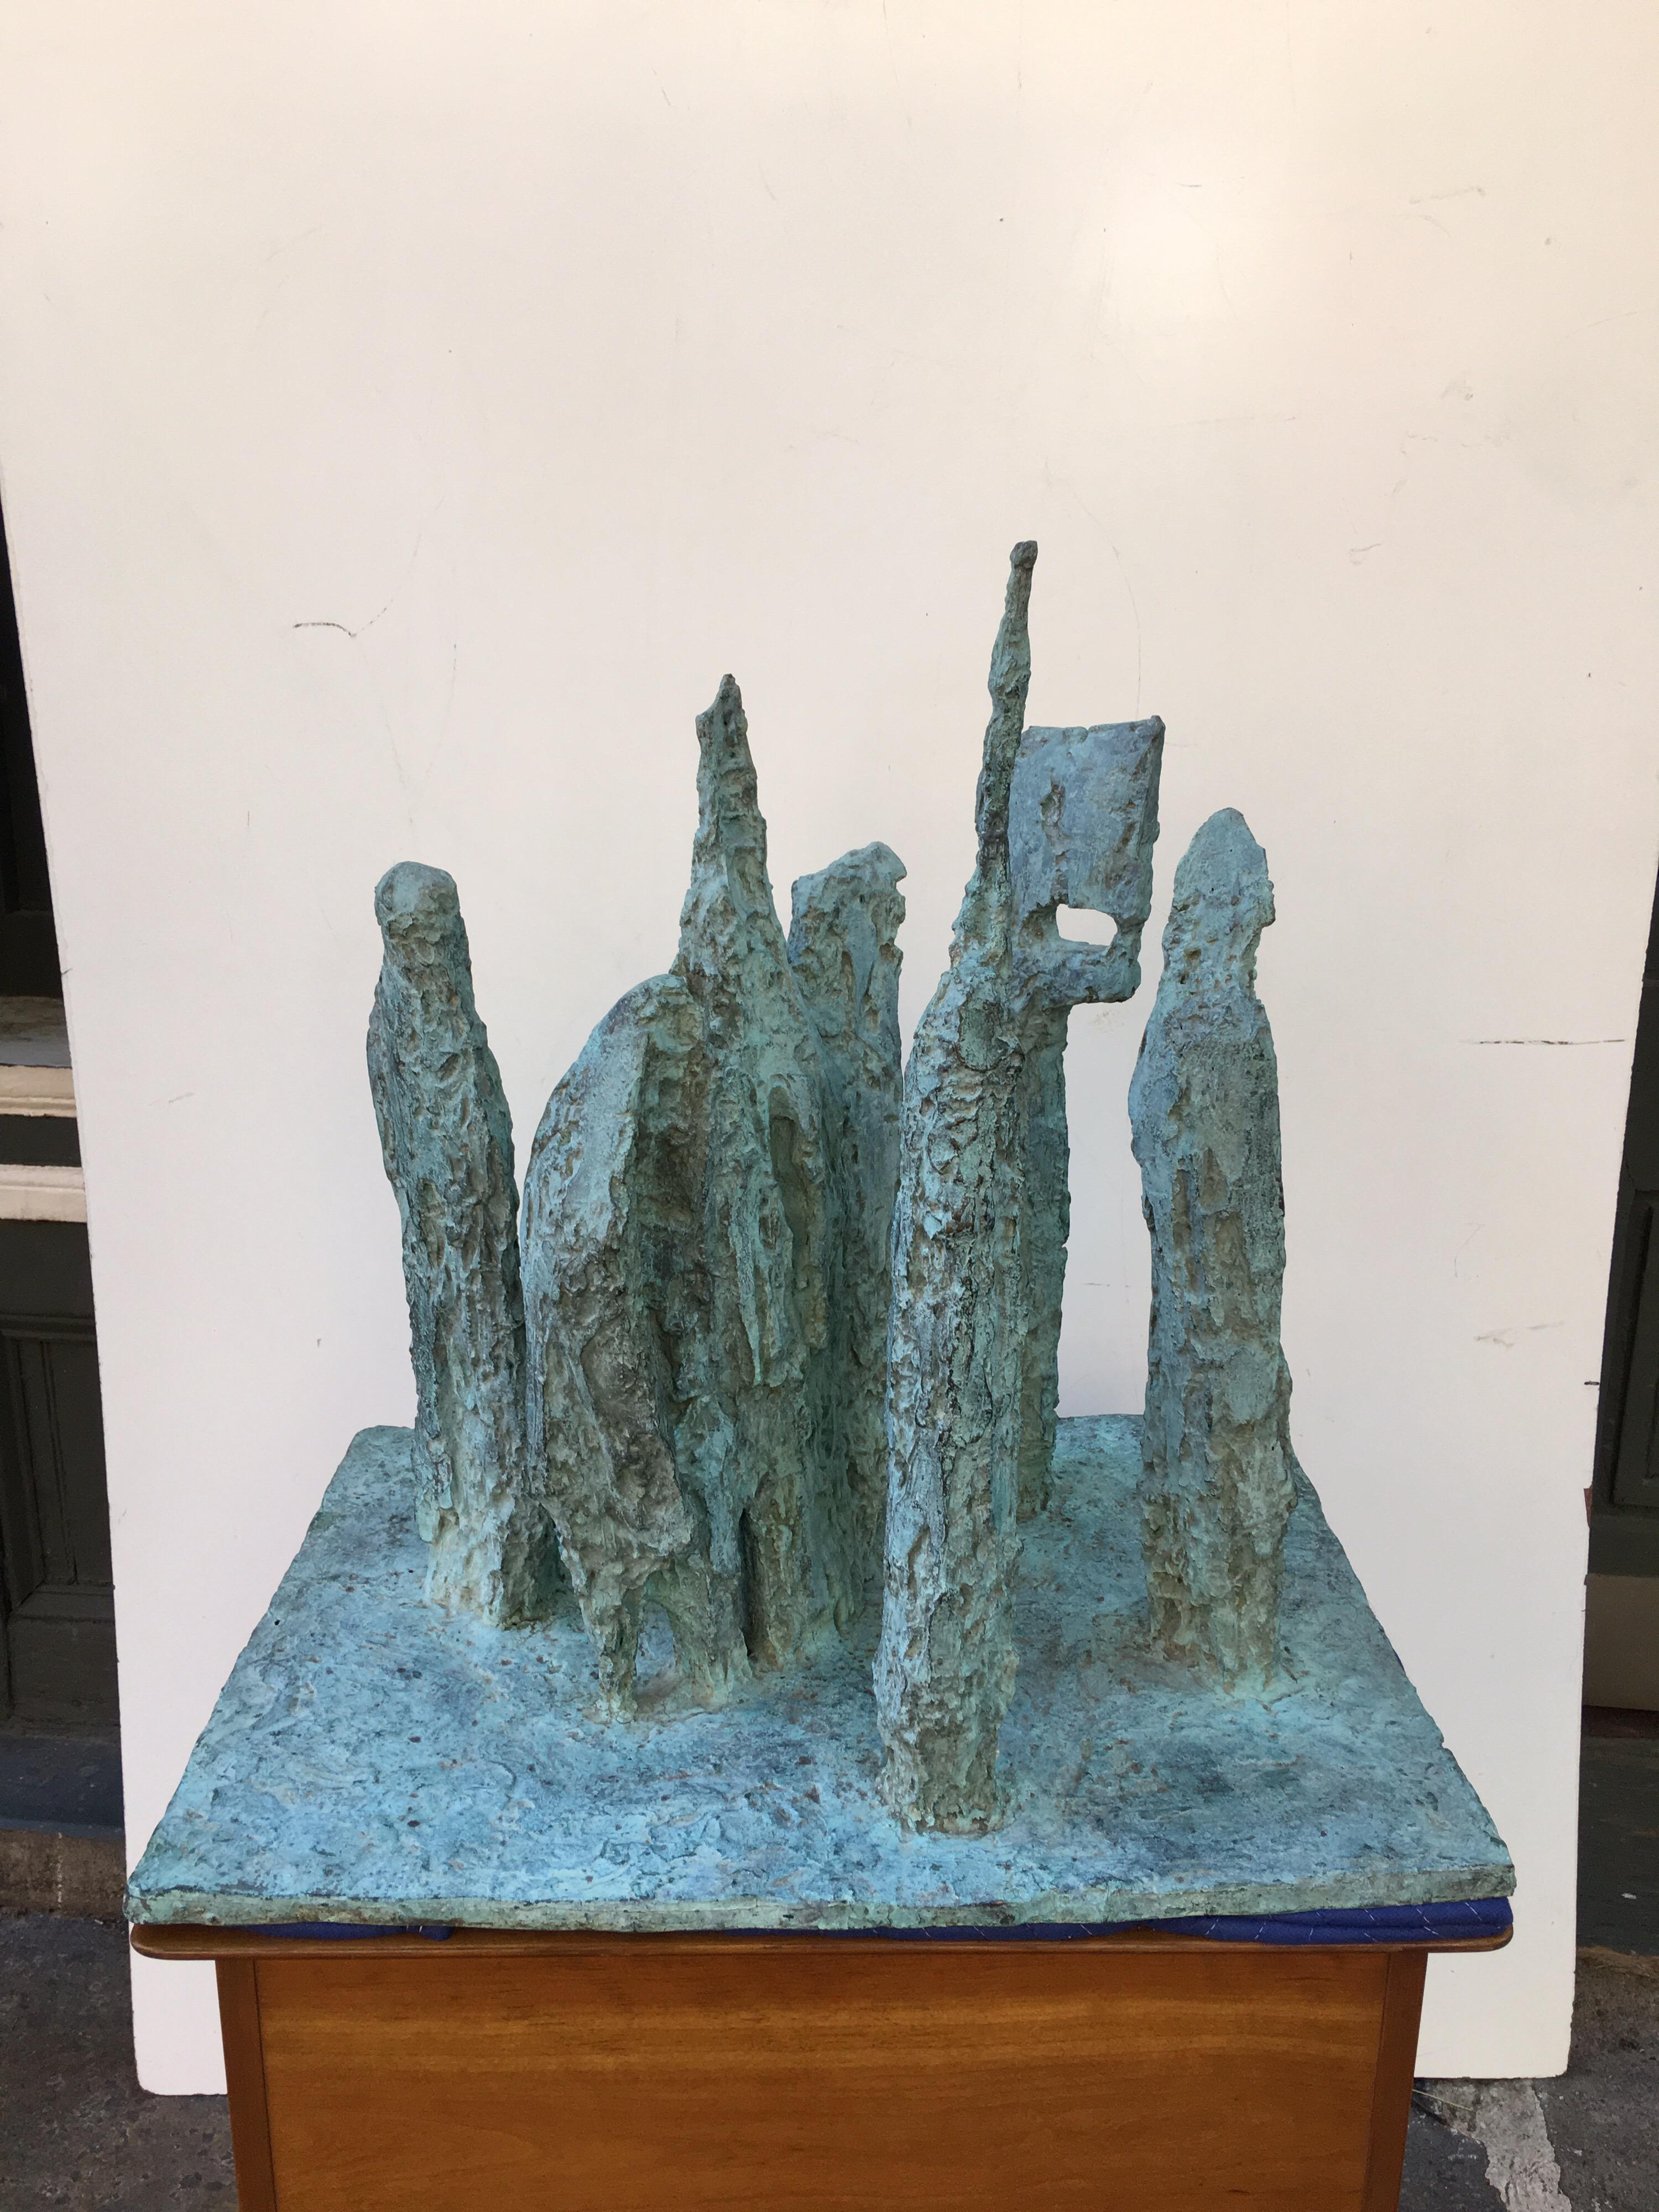 James Wines bronze sculpture, 5 monolith vaguely figurative elements make up this amazing piece! Signed and dated 1959. James Wines was a NY artist who won a Guggenheim in 1962. He exhibited with Marlborough Gallery.